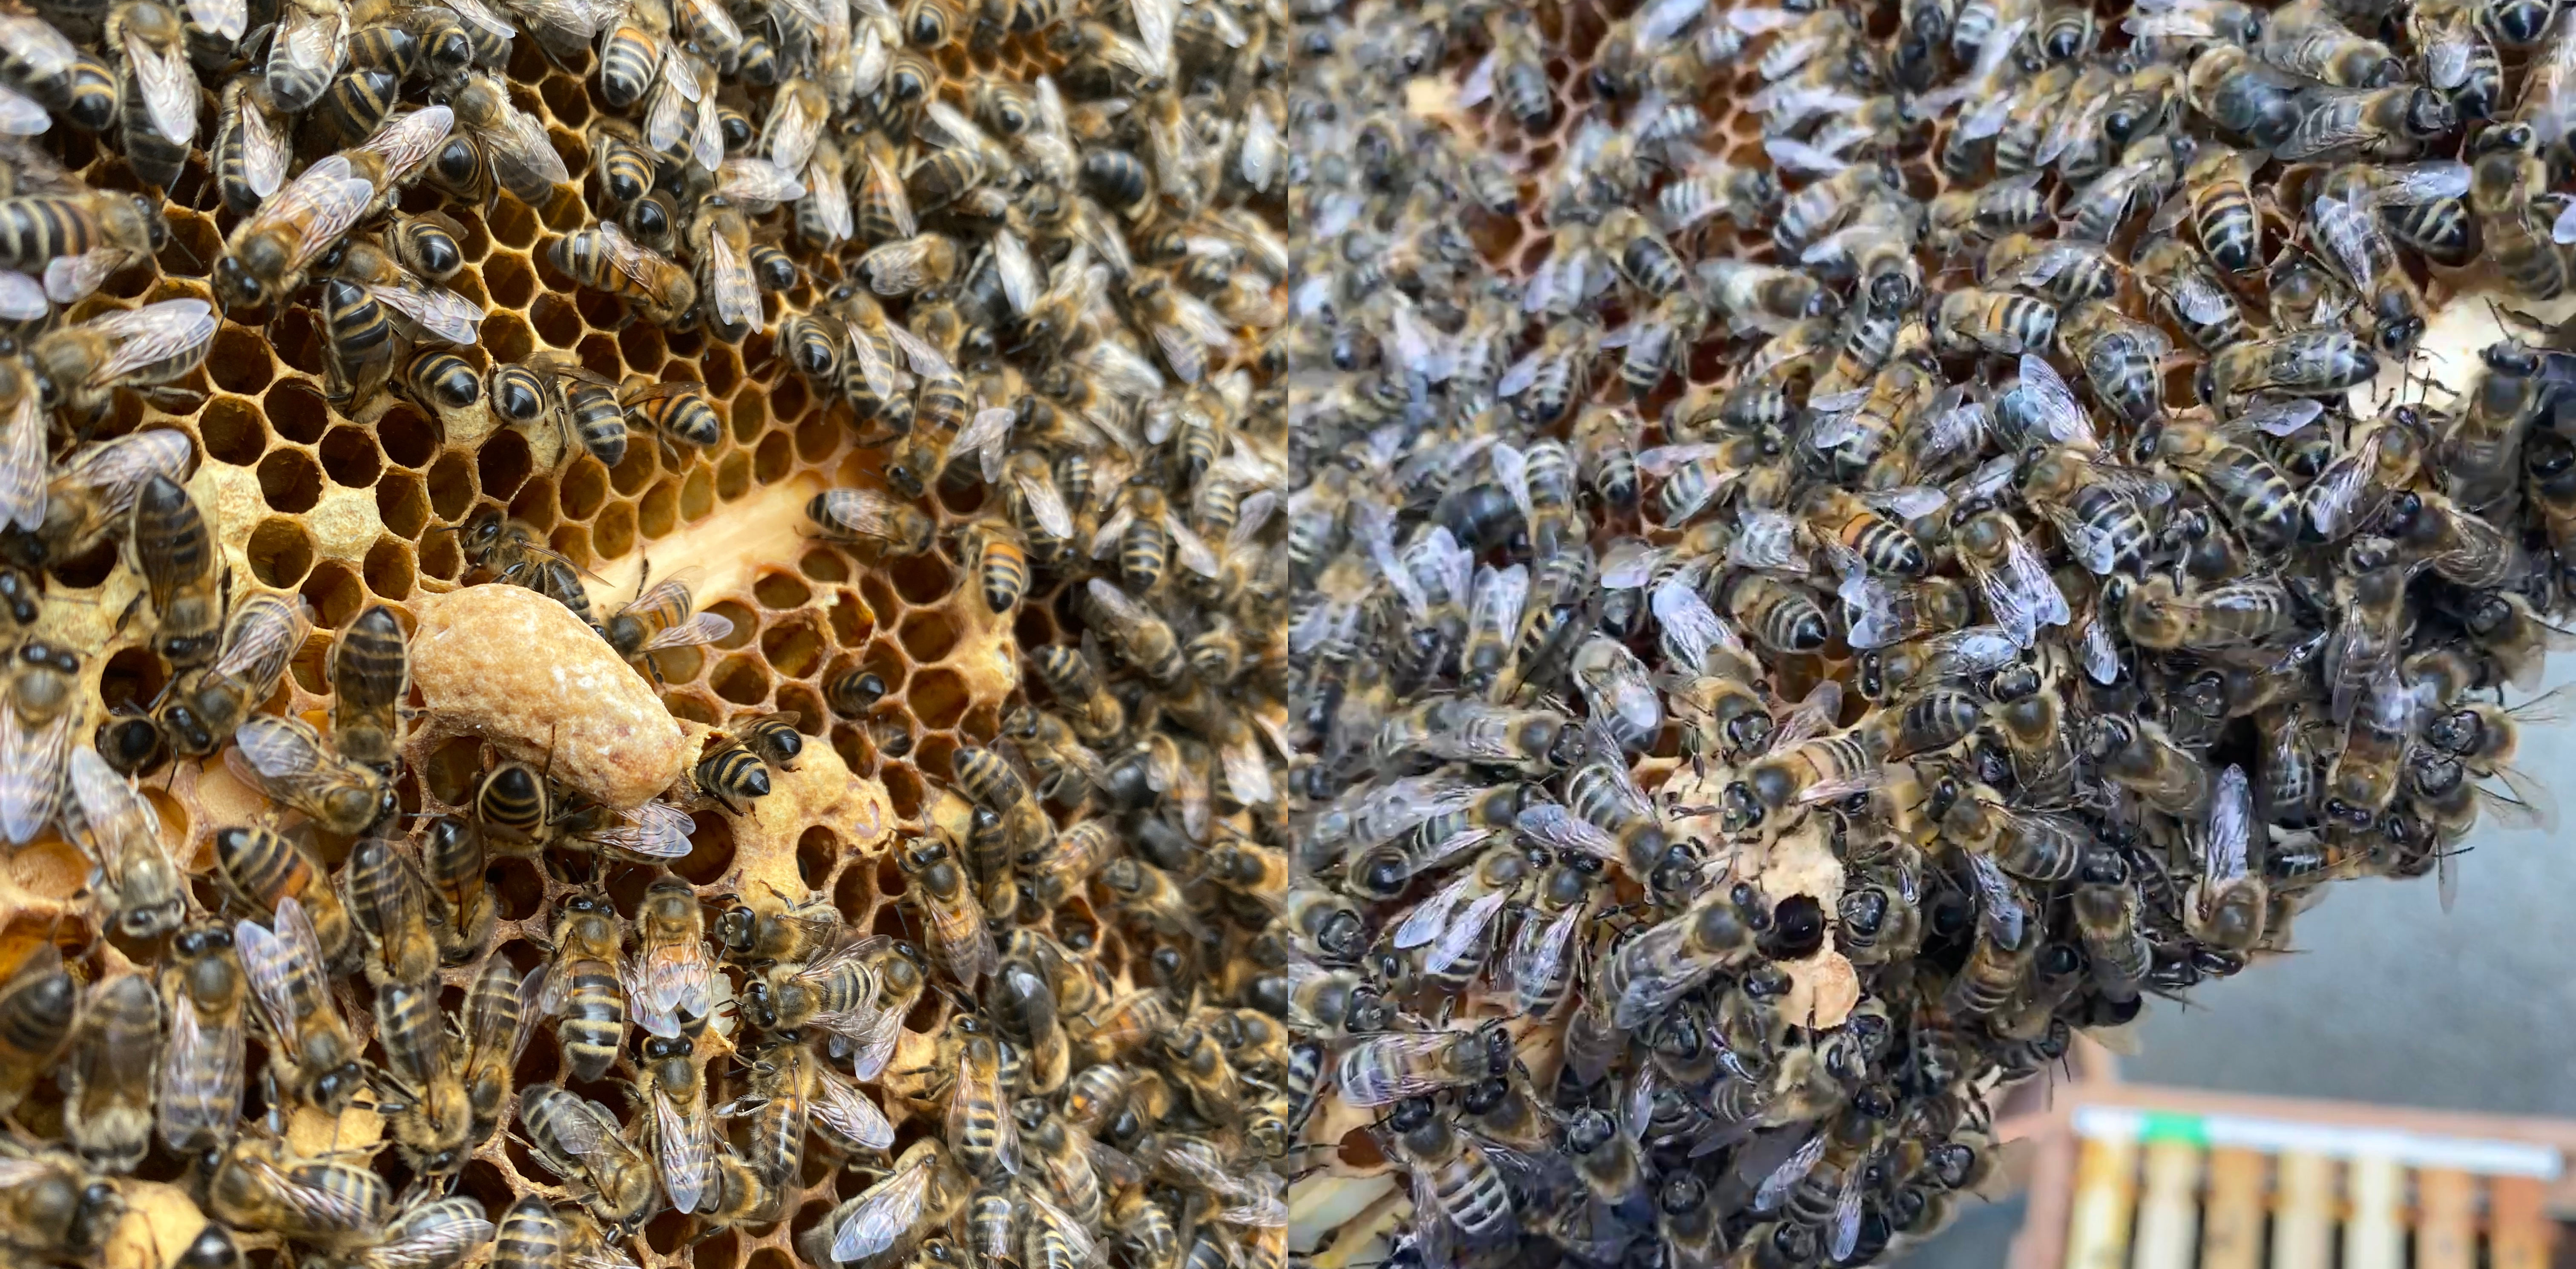 Two images side by side. On the left is a frame of honey bee comb covered in bees. You can see a group of cells built in the shape of a pod sticking out from the comb. The image on the right is another frame of comb with a similar pod-like cell, but the bottom of it has a hole.